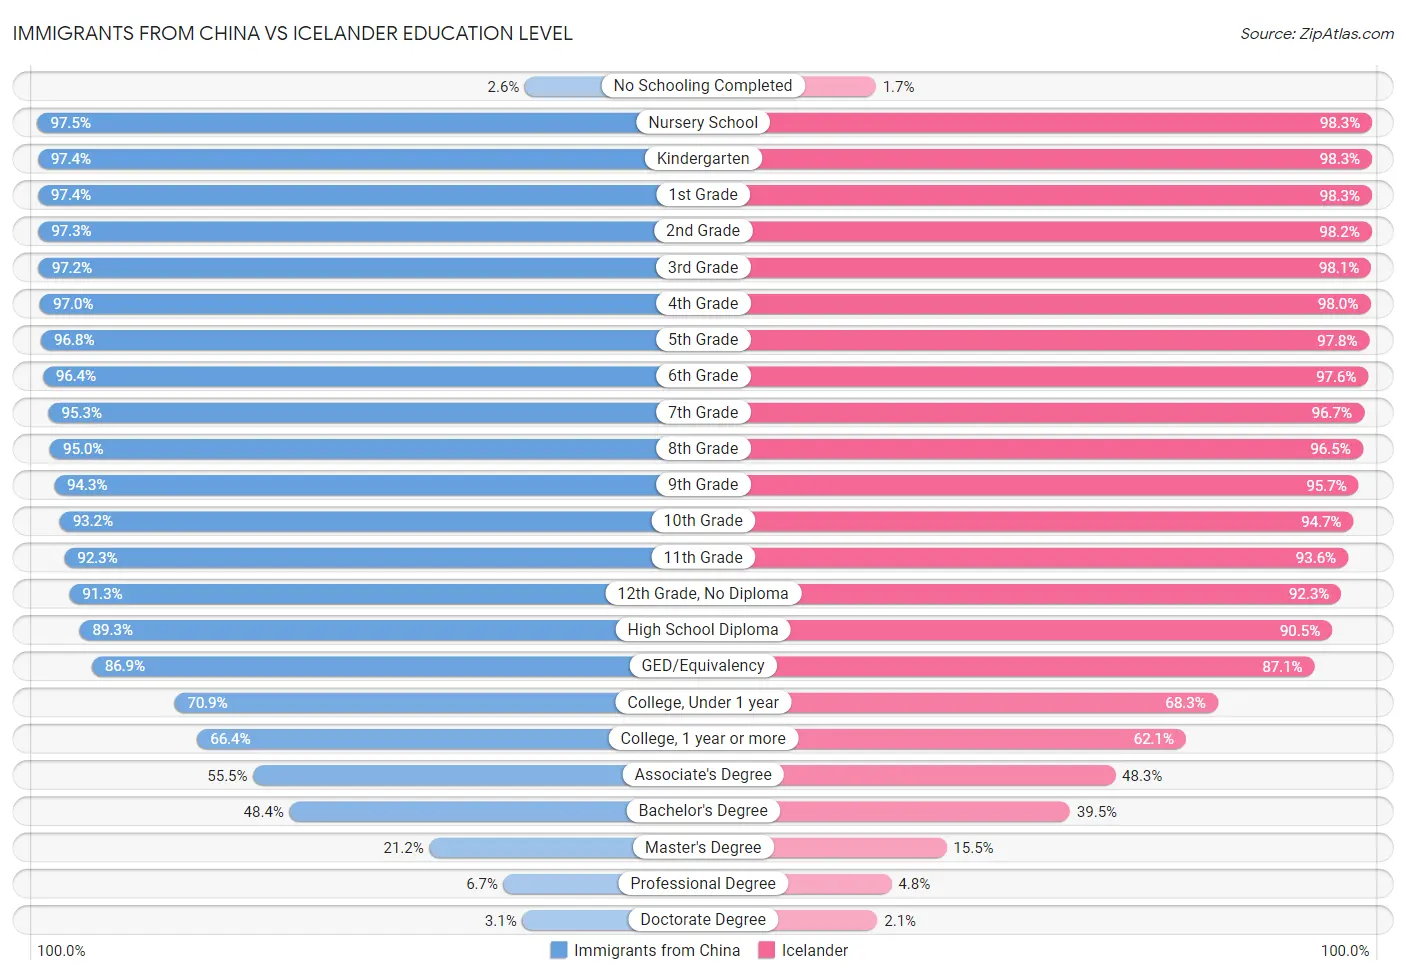 Immigrants from China vs Icelander Education Level